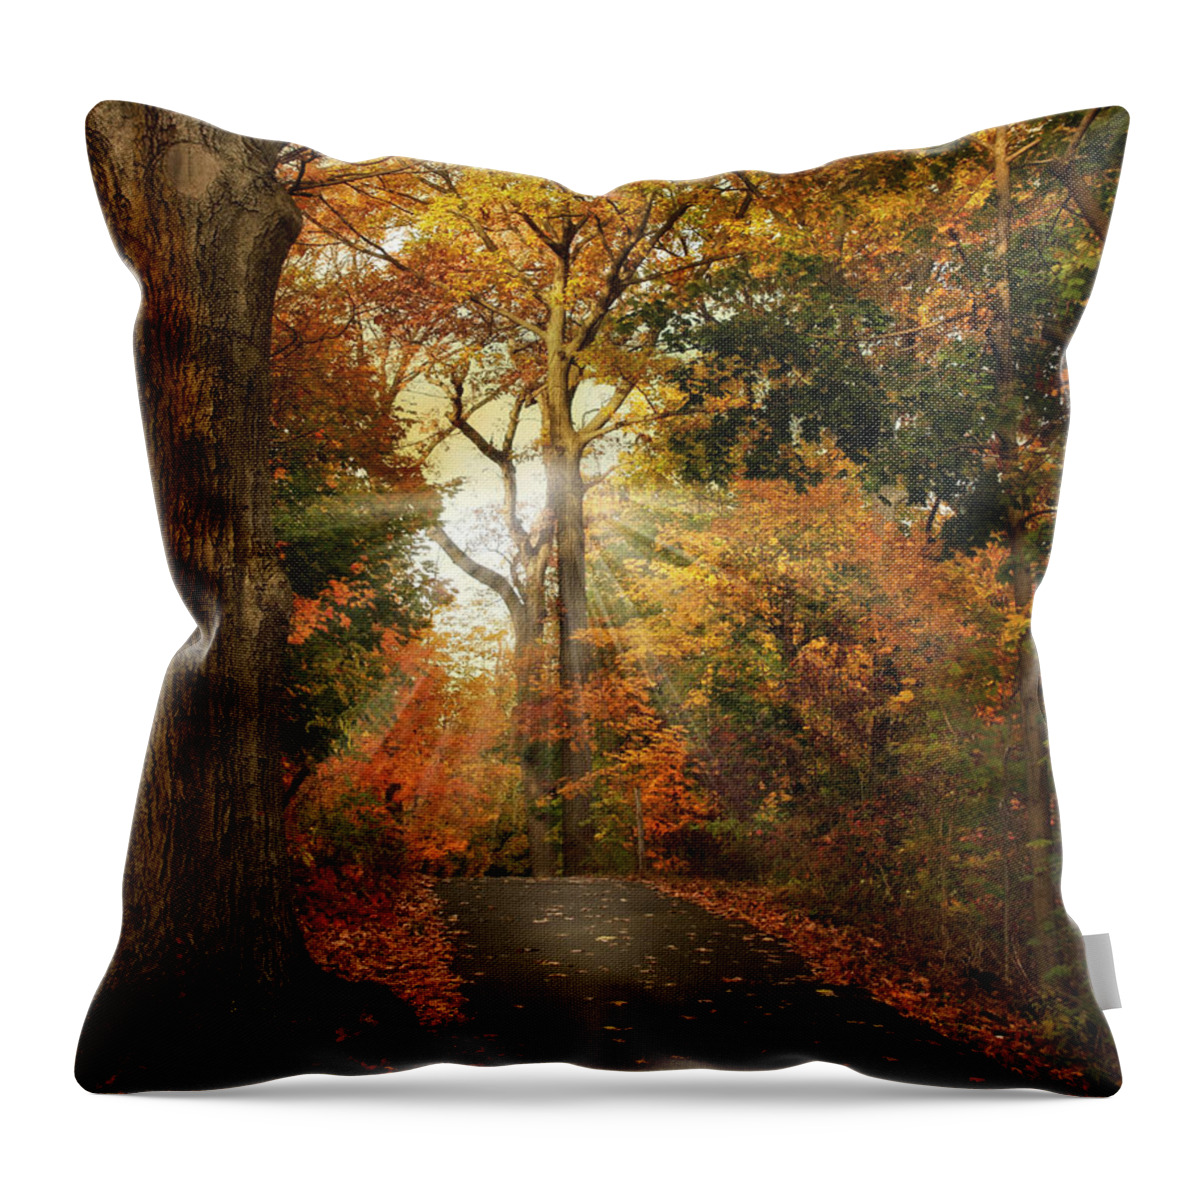 Autumn Throw Pillow featuring the photograph October Finale by Jessica Jenney